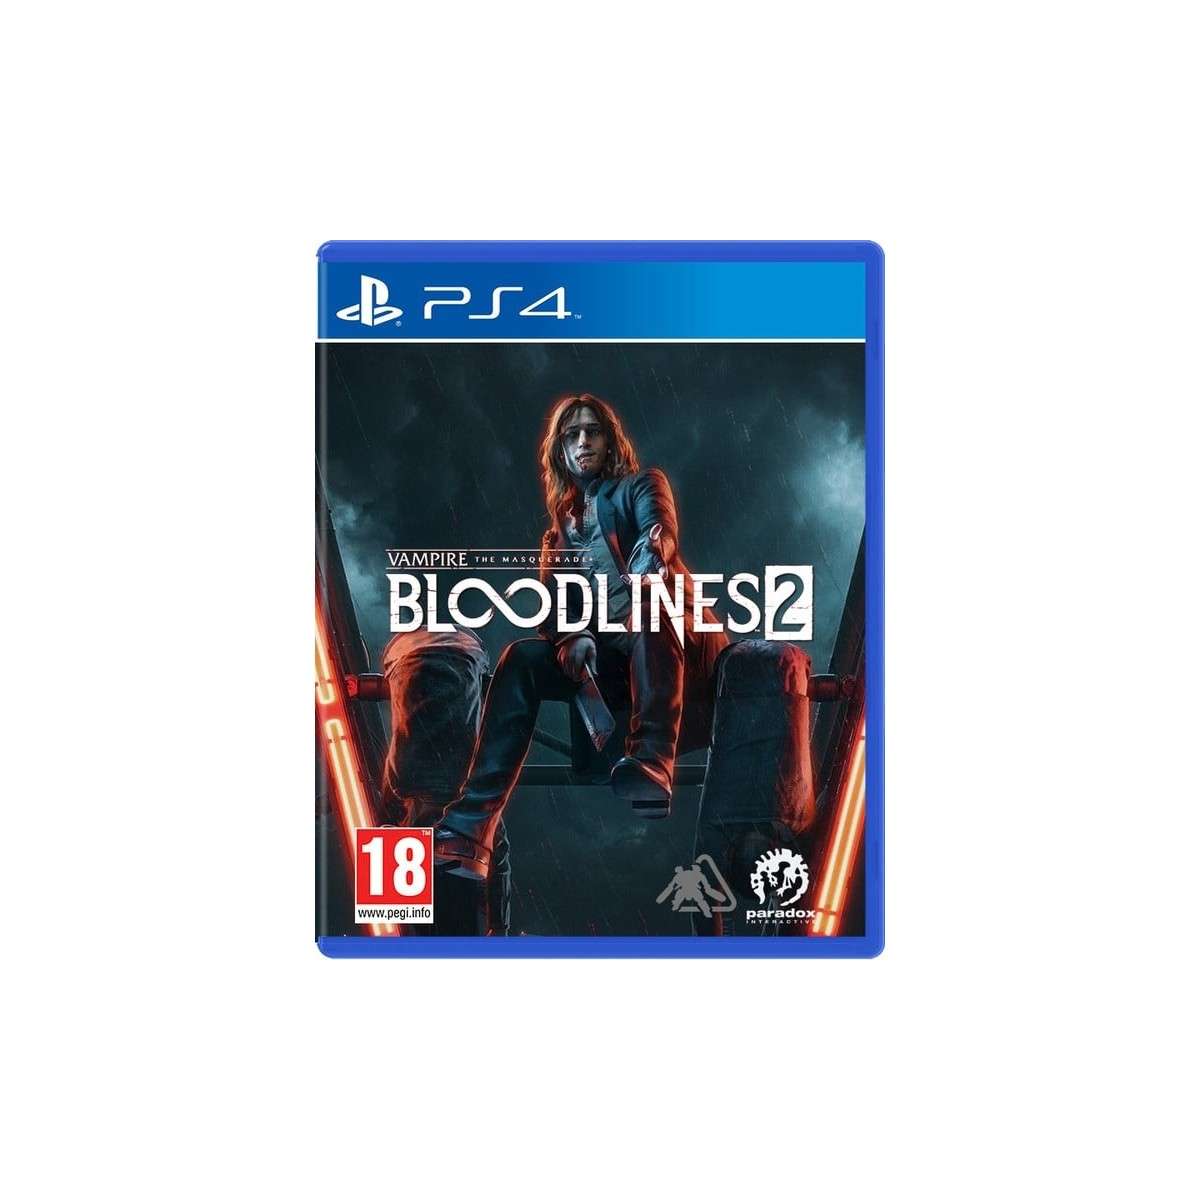 Vampire: The Masquerade Bloodlines 2 First Blood Edition